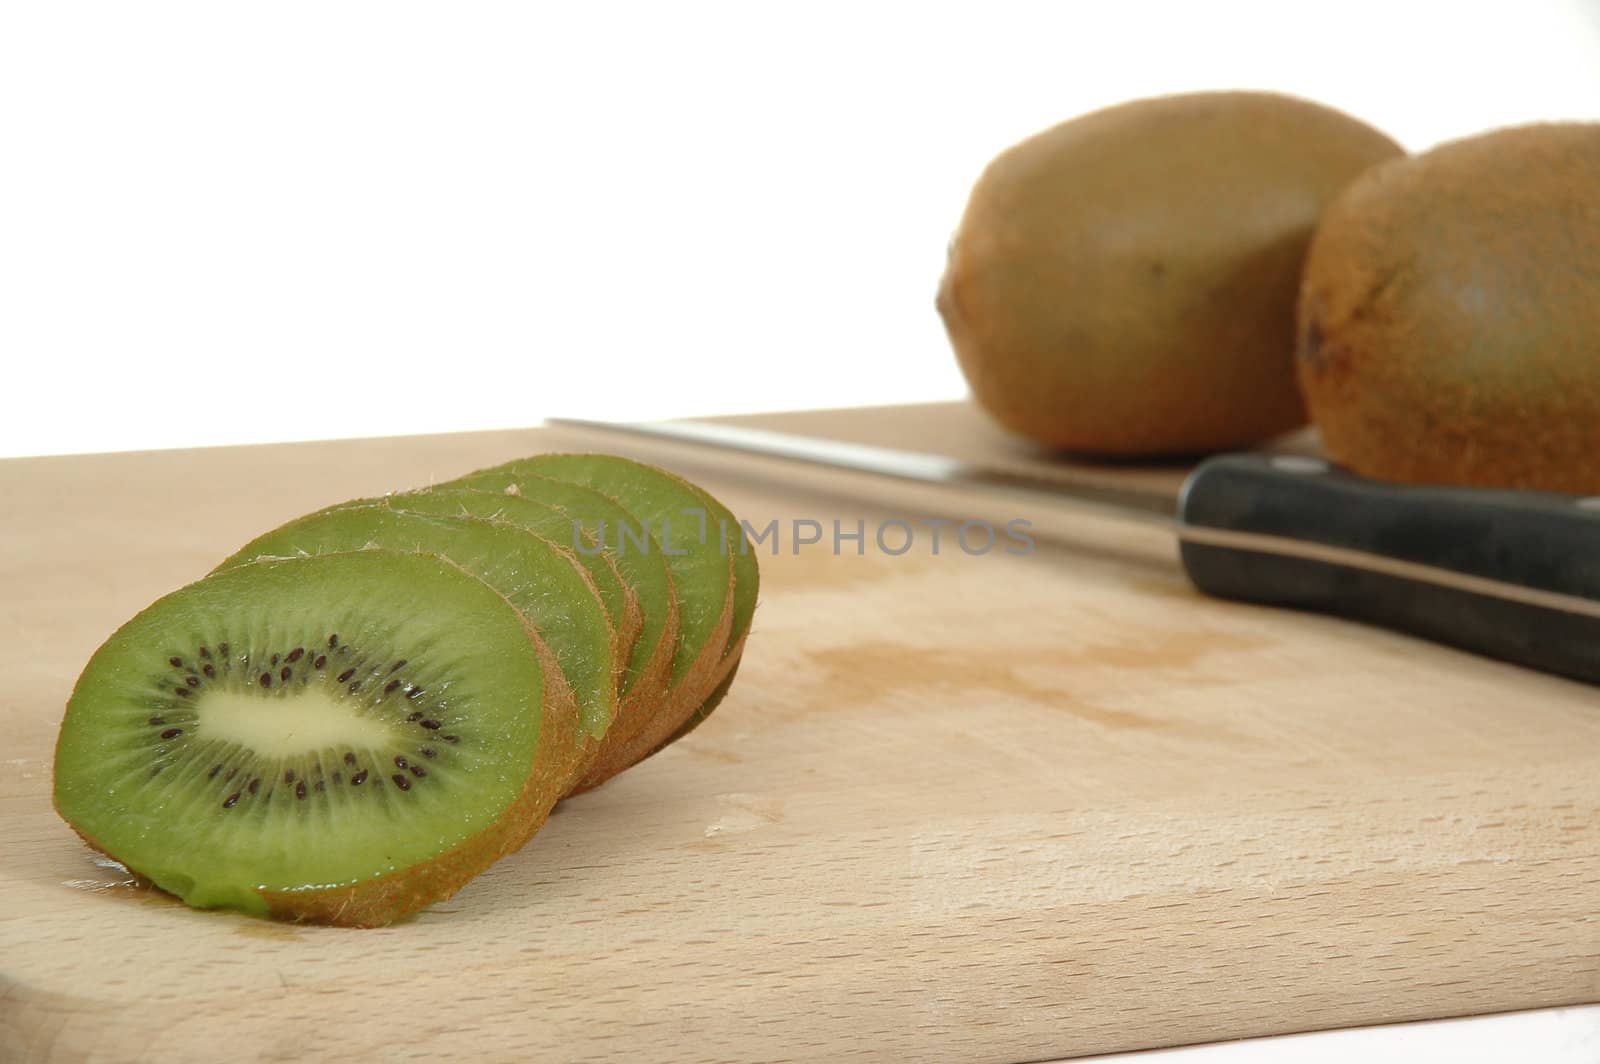 Kiwi slices is in focus. With knife and kiwies in the background.